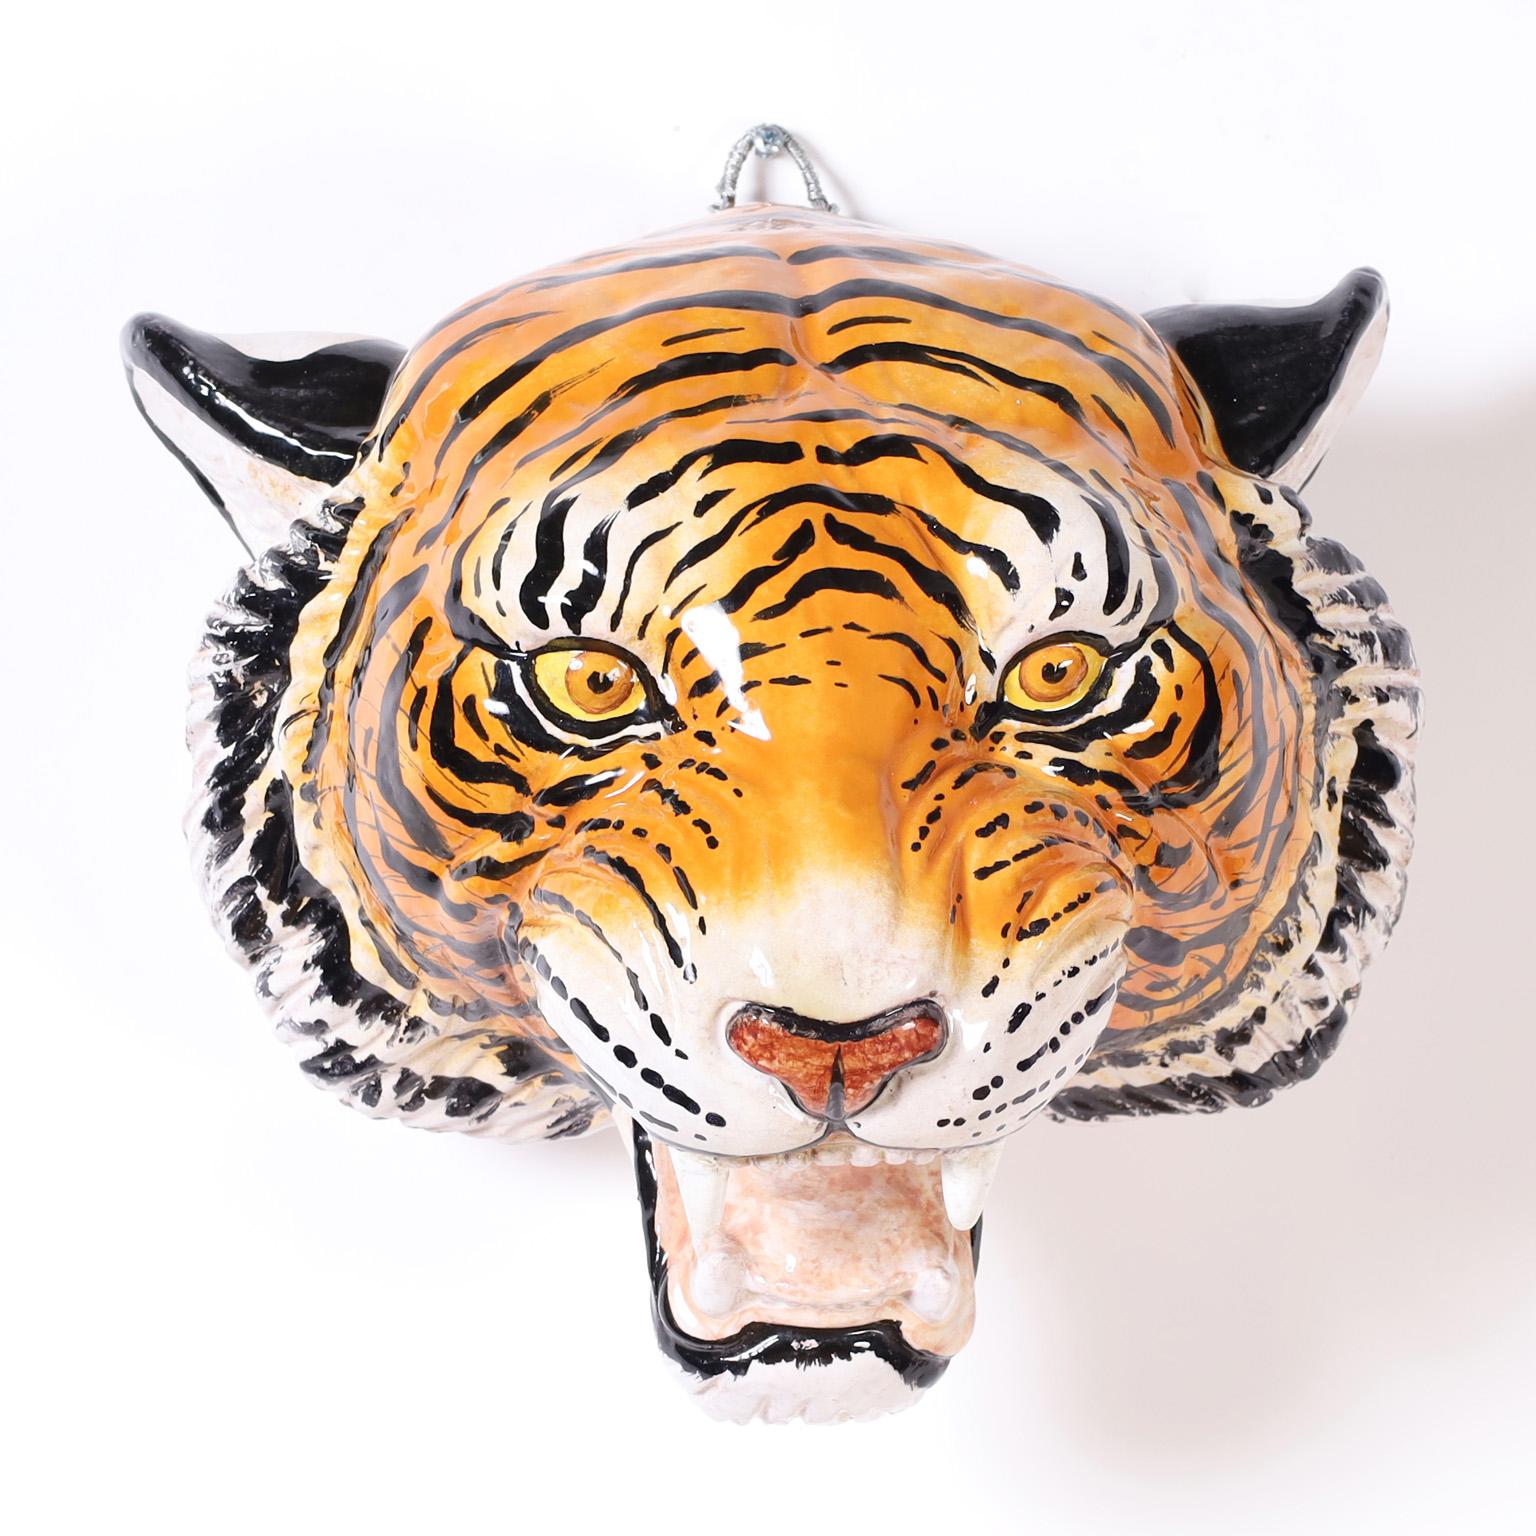 One of mother nature's most iconic designs, the big cat. Here we present two terra cotta wall mounted heads decorated and glazed, a tiger and a leopard depicted with amazing accuracy. Priced individually at $3,200 each.